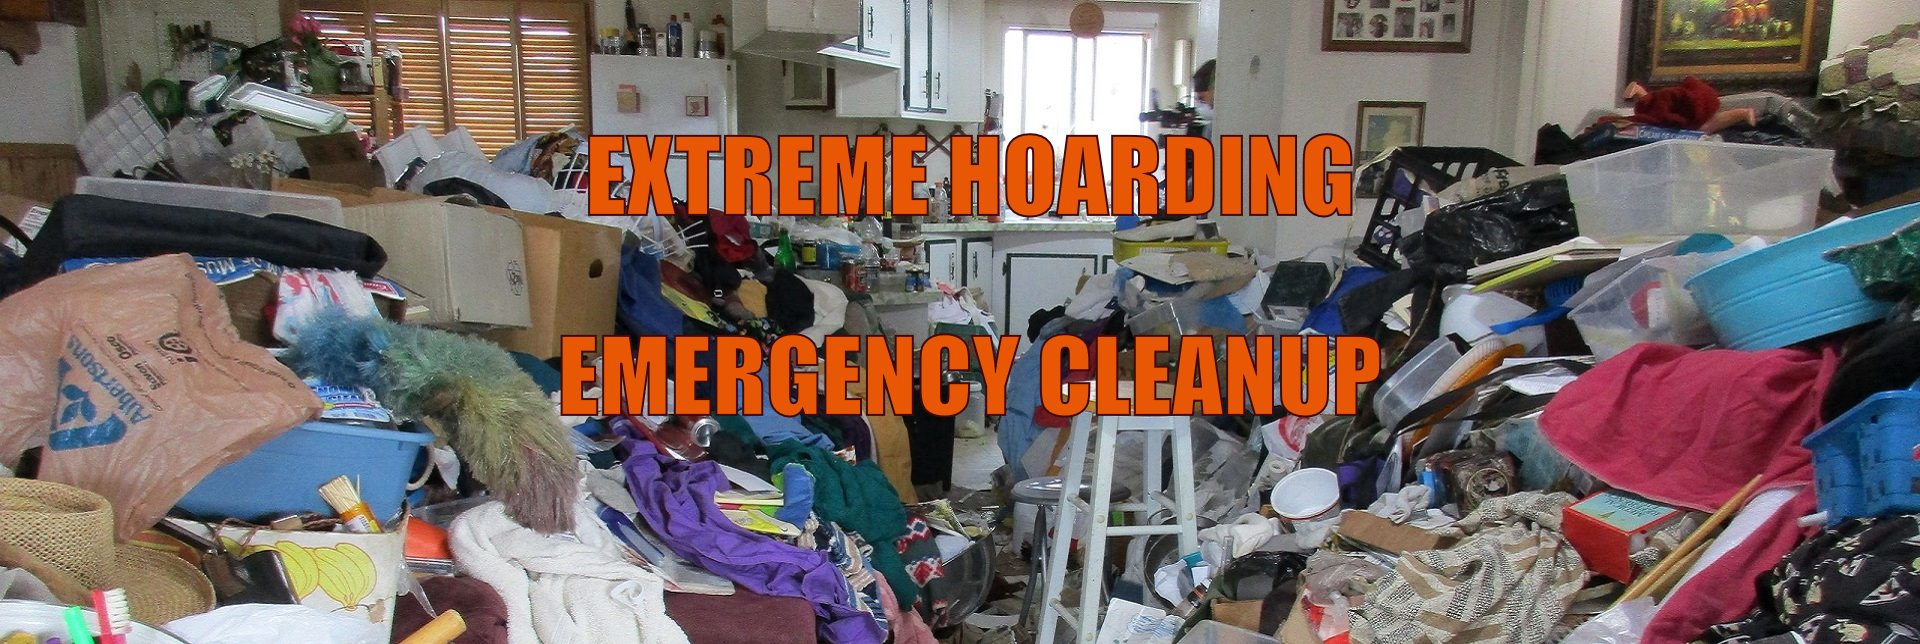 extreme hoarding cleaning London Ontario